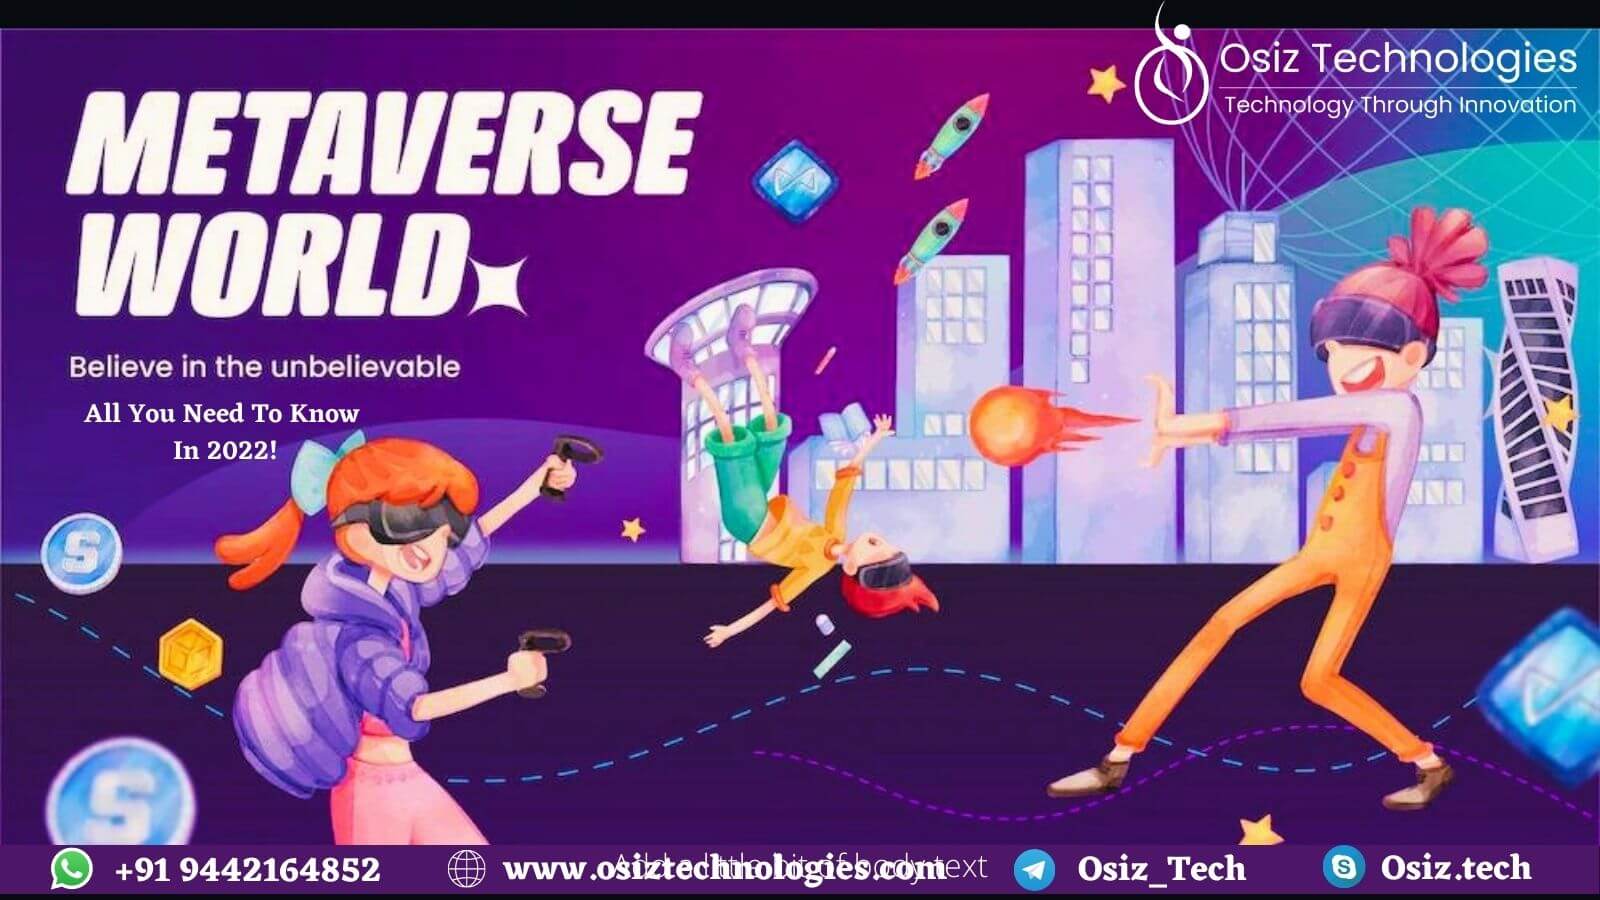 Top Metaverse NFT & Play To Earn Games In 2022: All you need to know